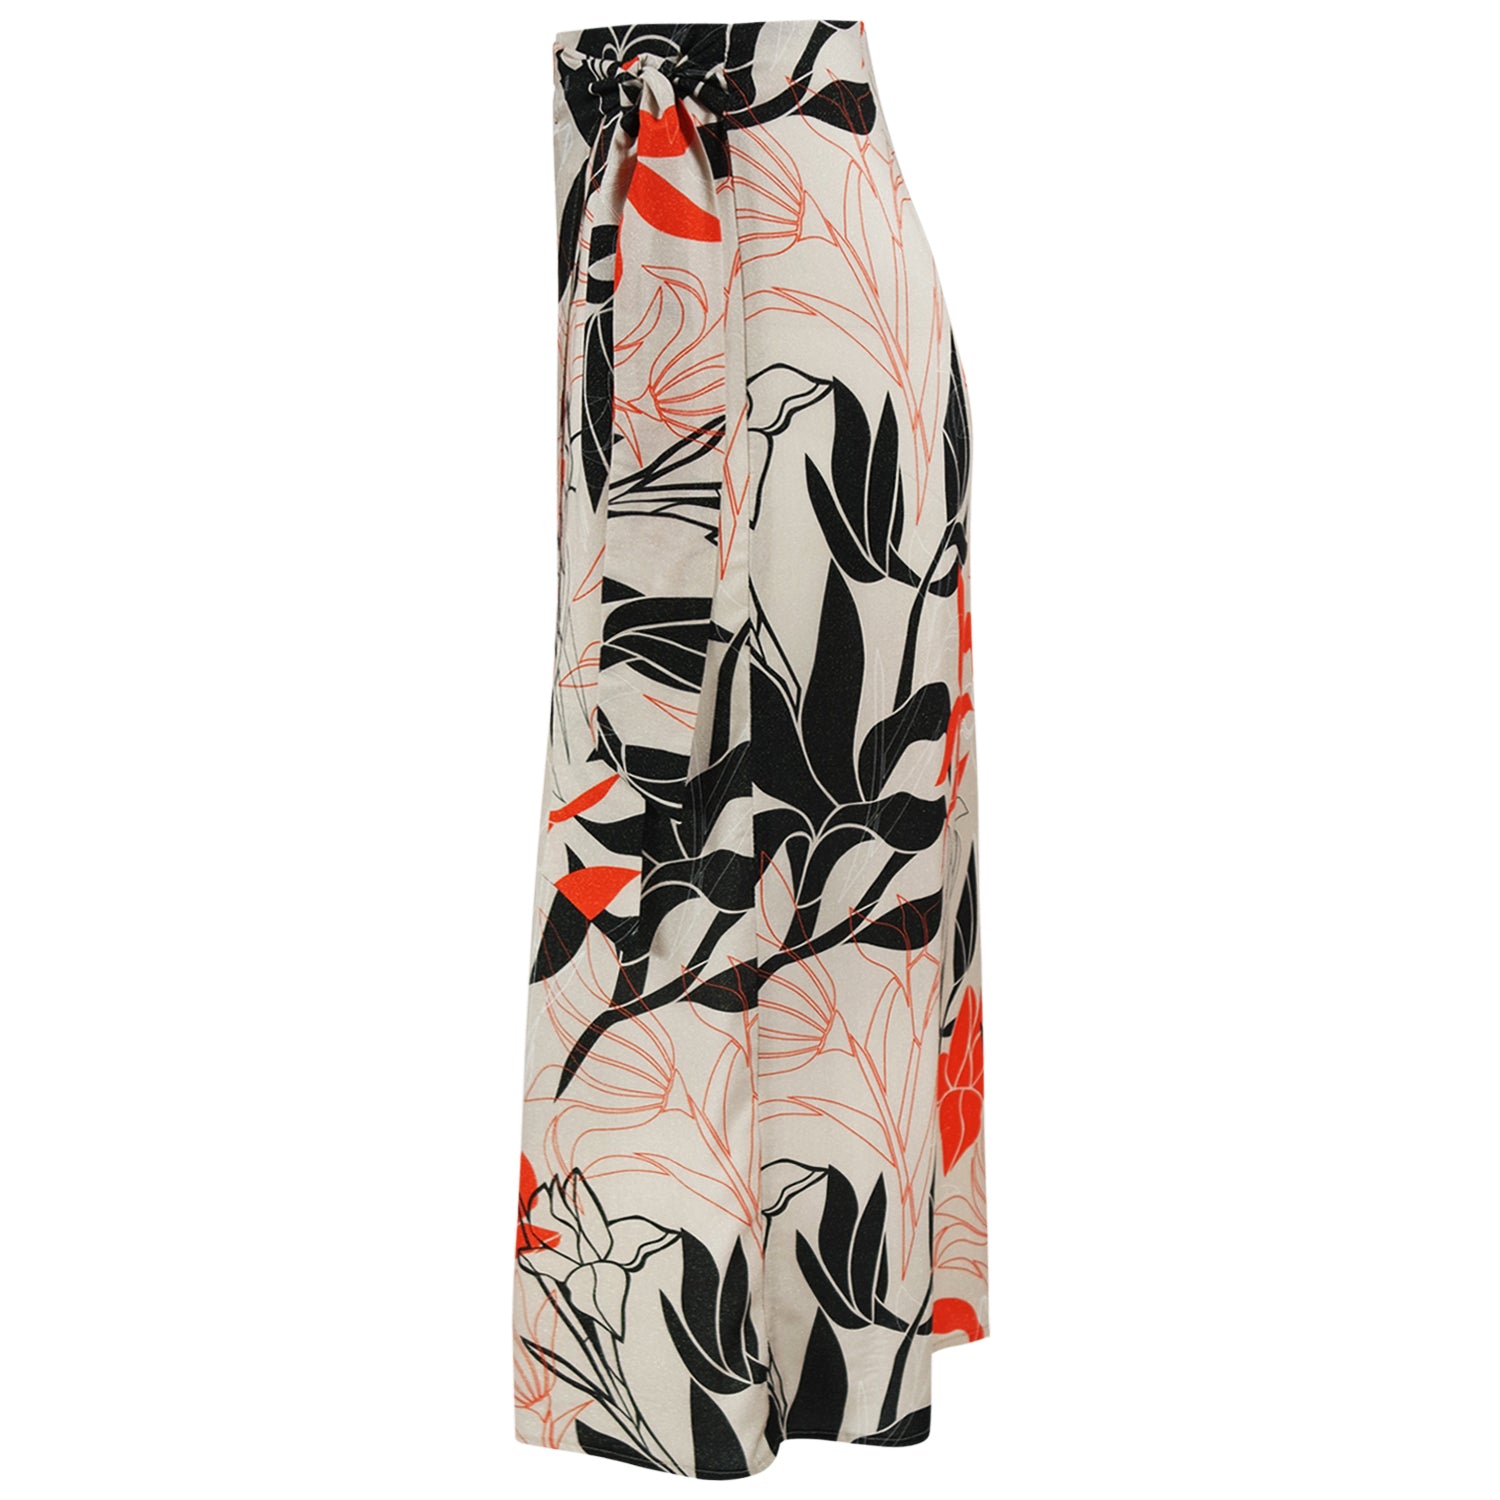 Hit Home Red & Taupe Print Wrap Tie Skirt by Me&Thee